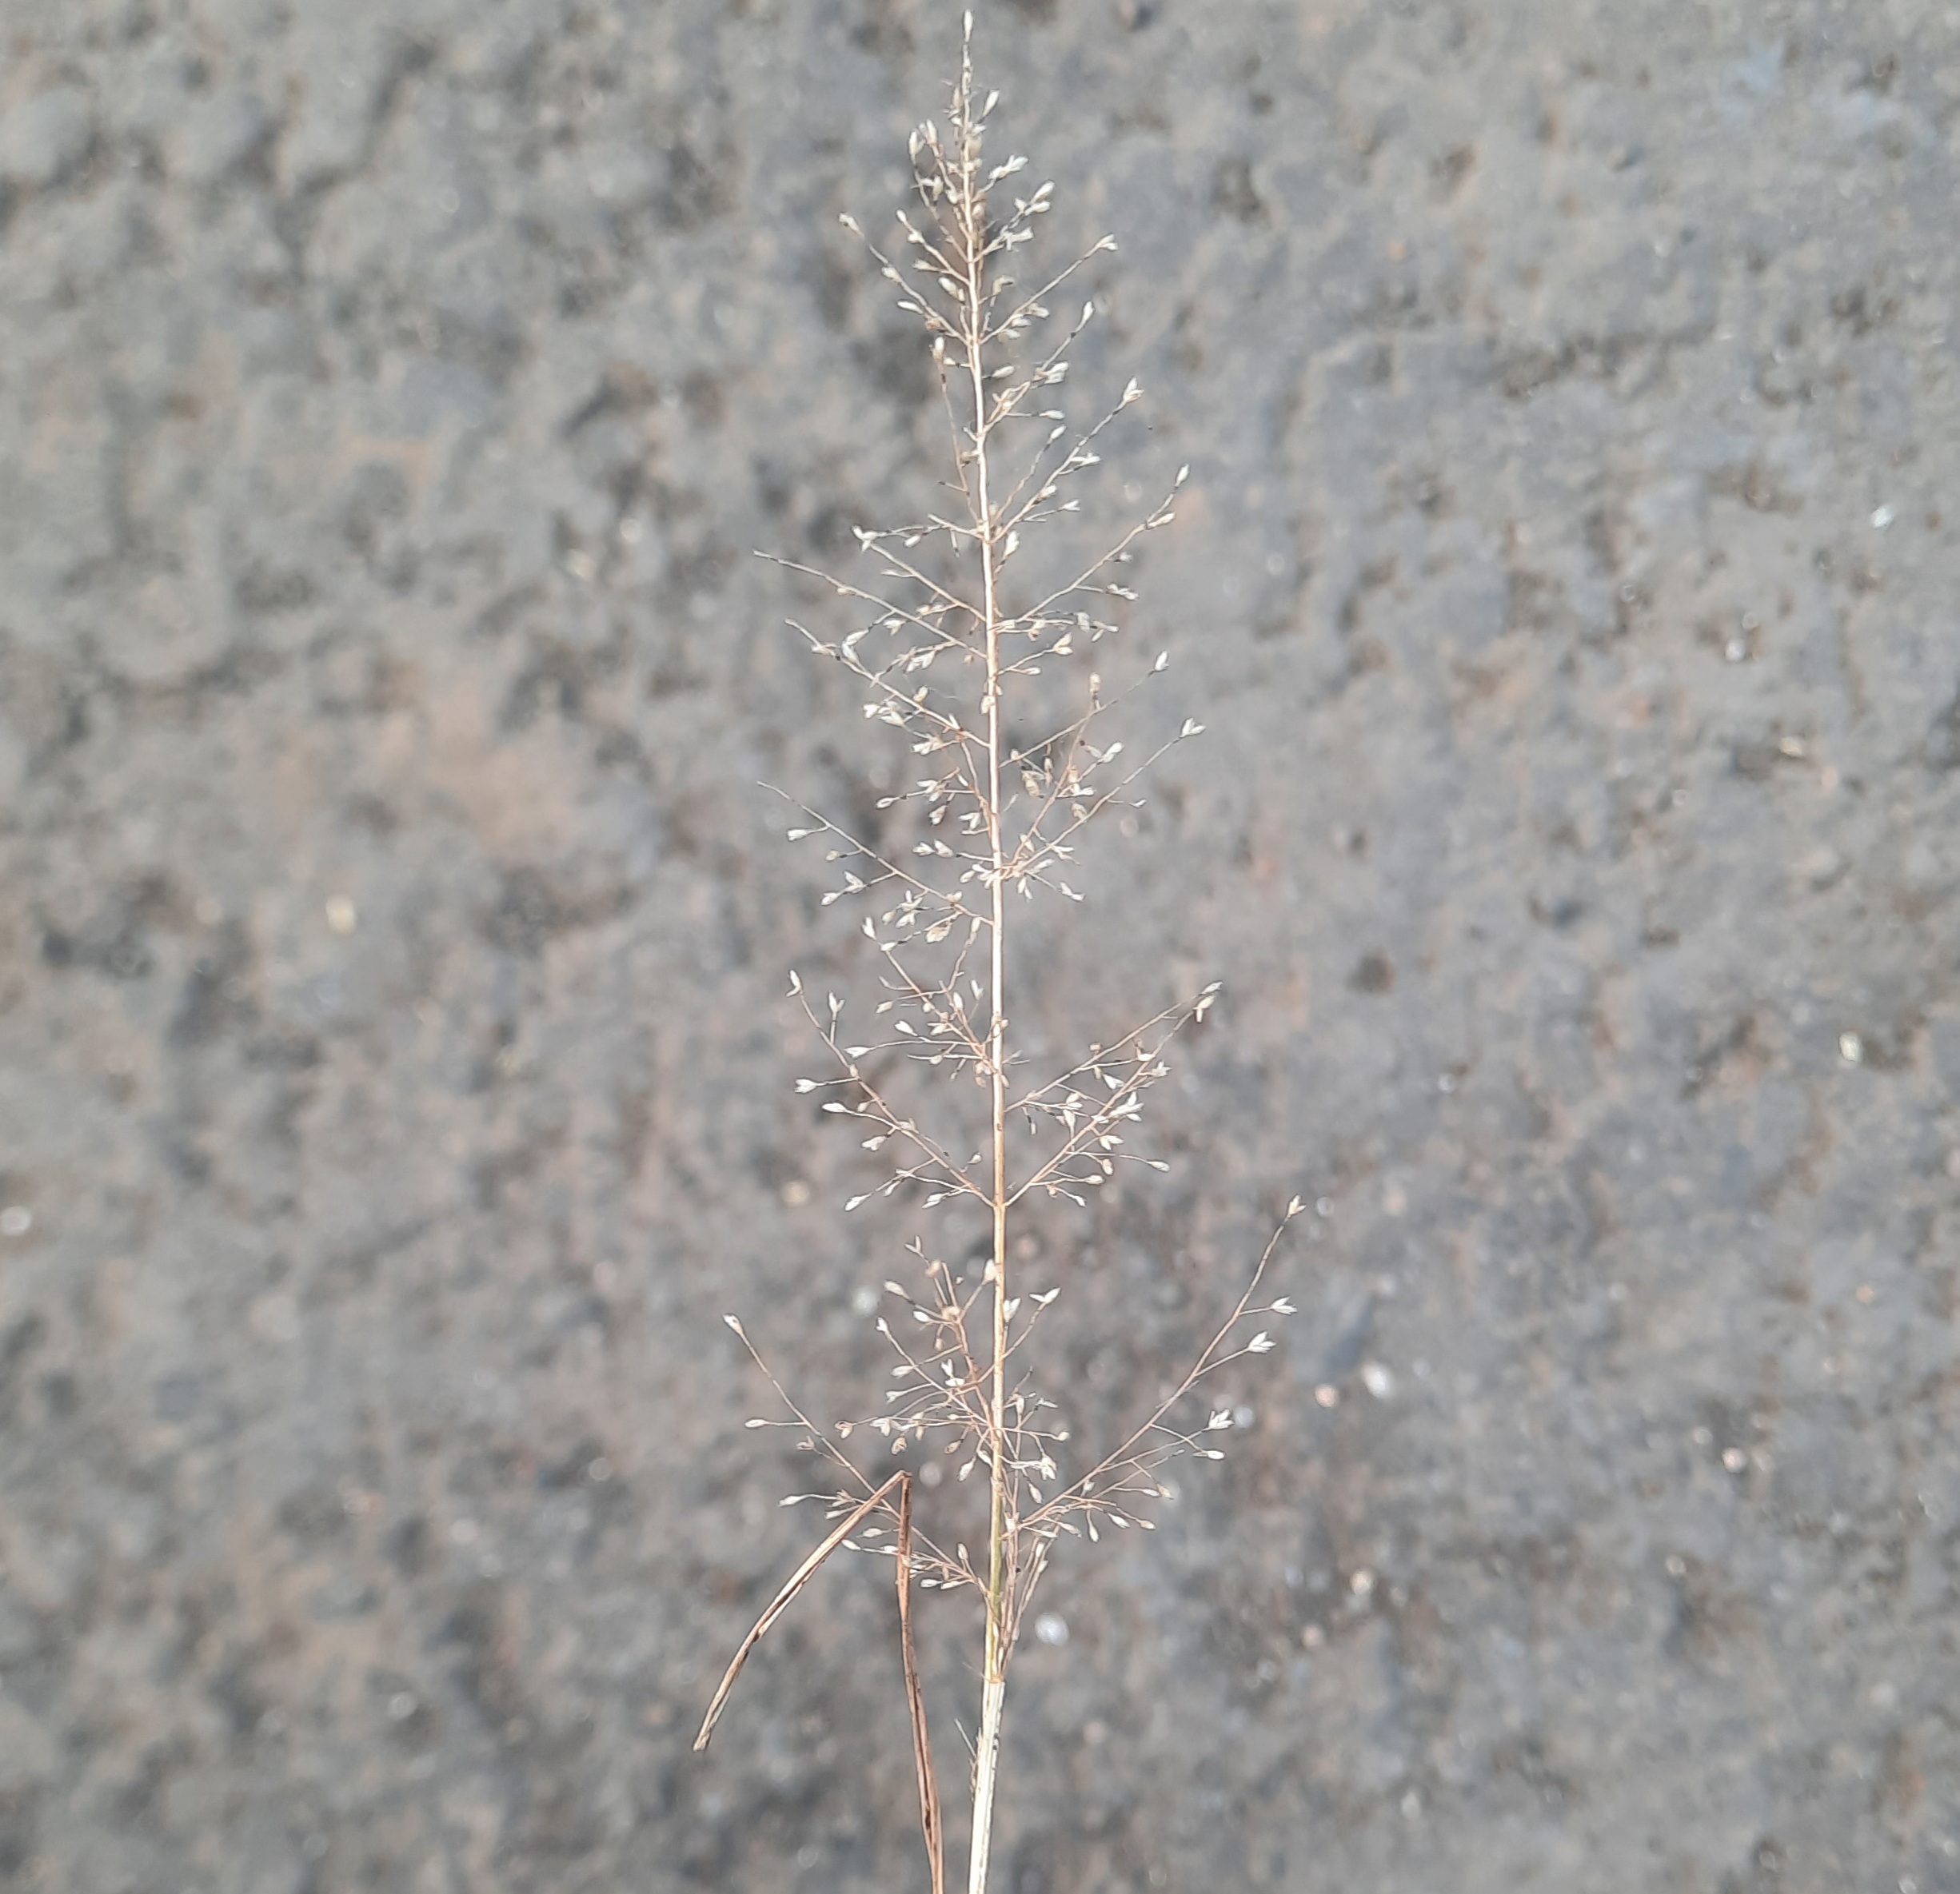 Dry plant in day